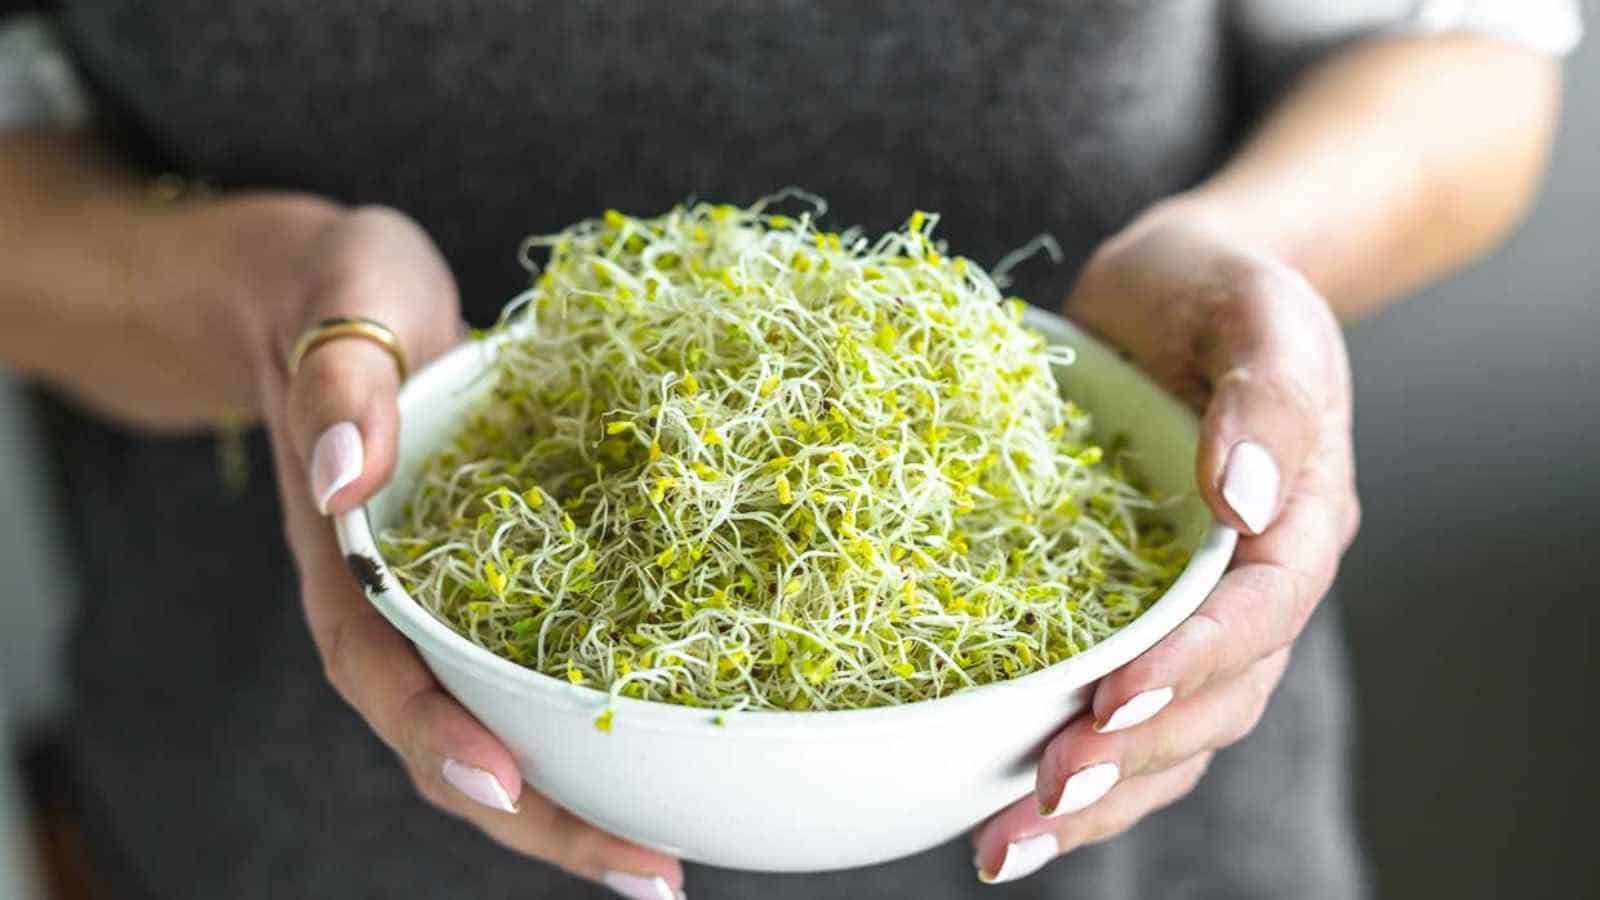 A woman holding a bowl full of broccoli sprouts.